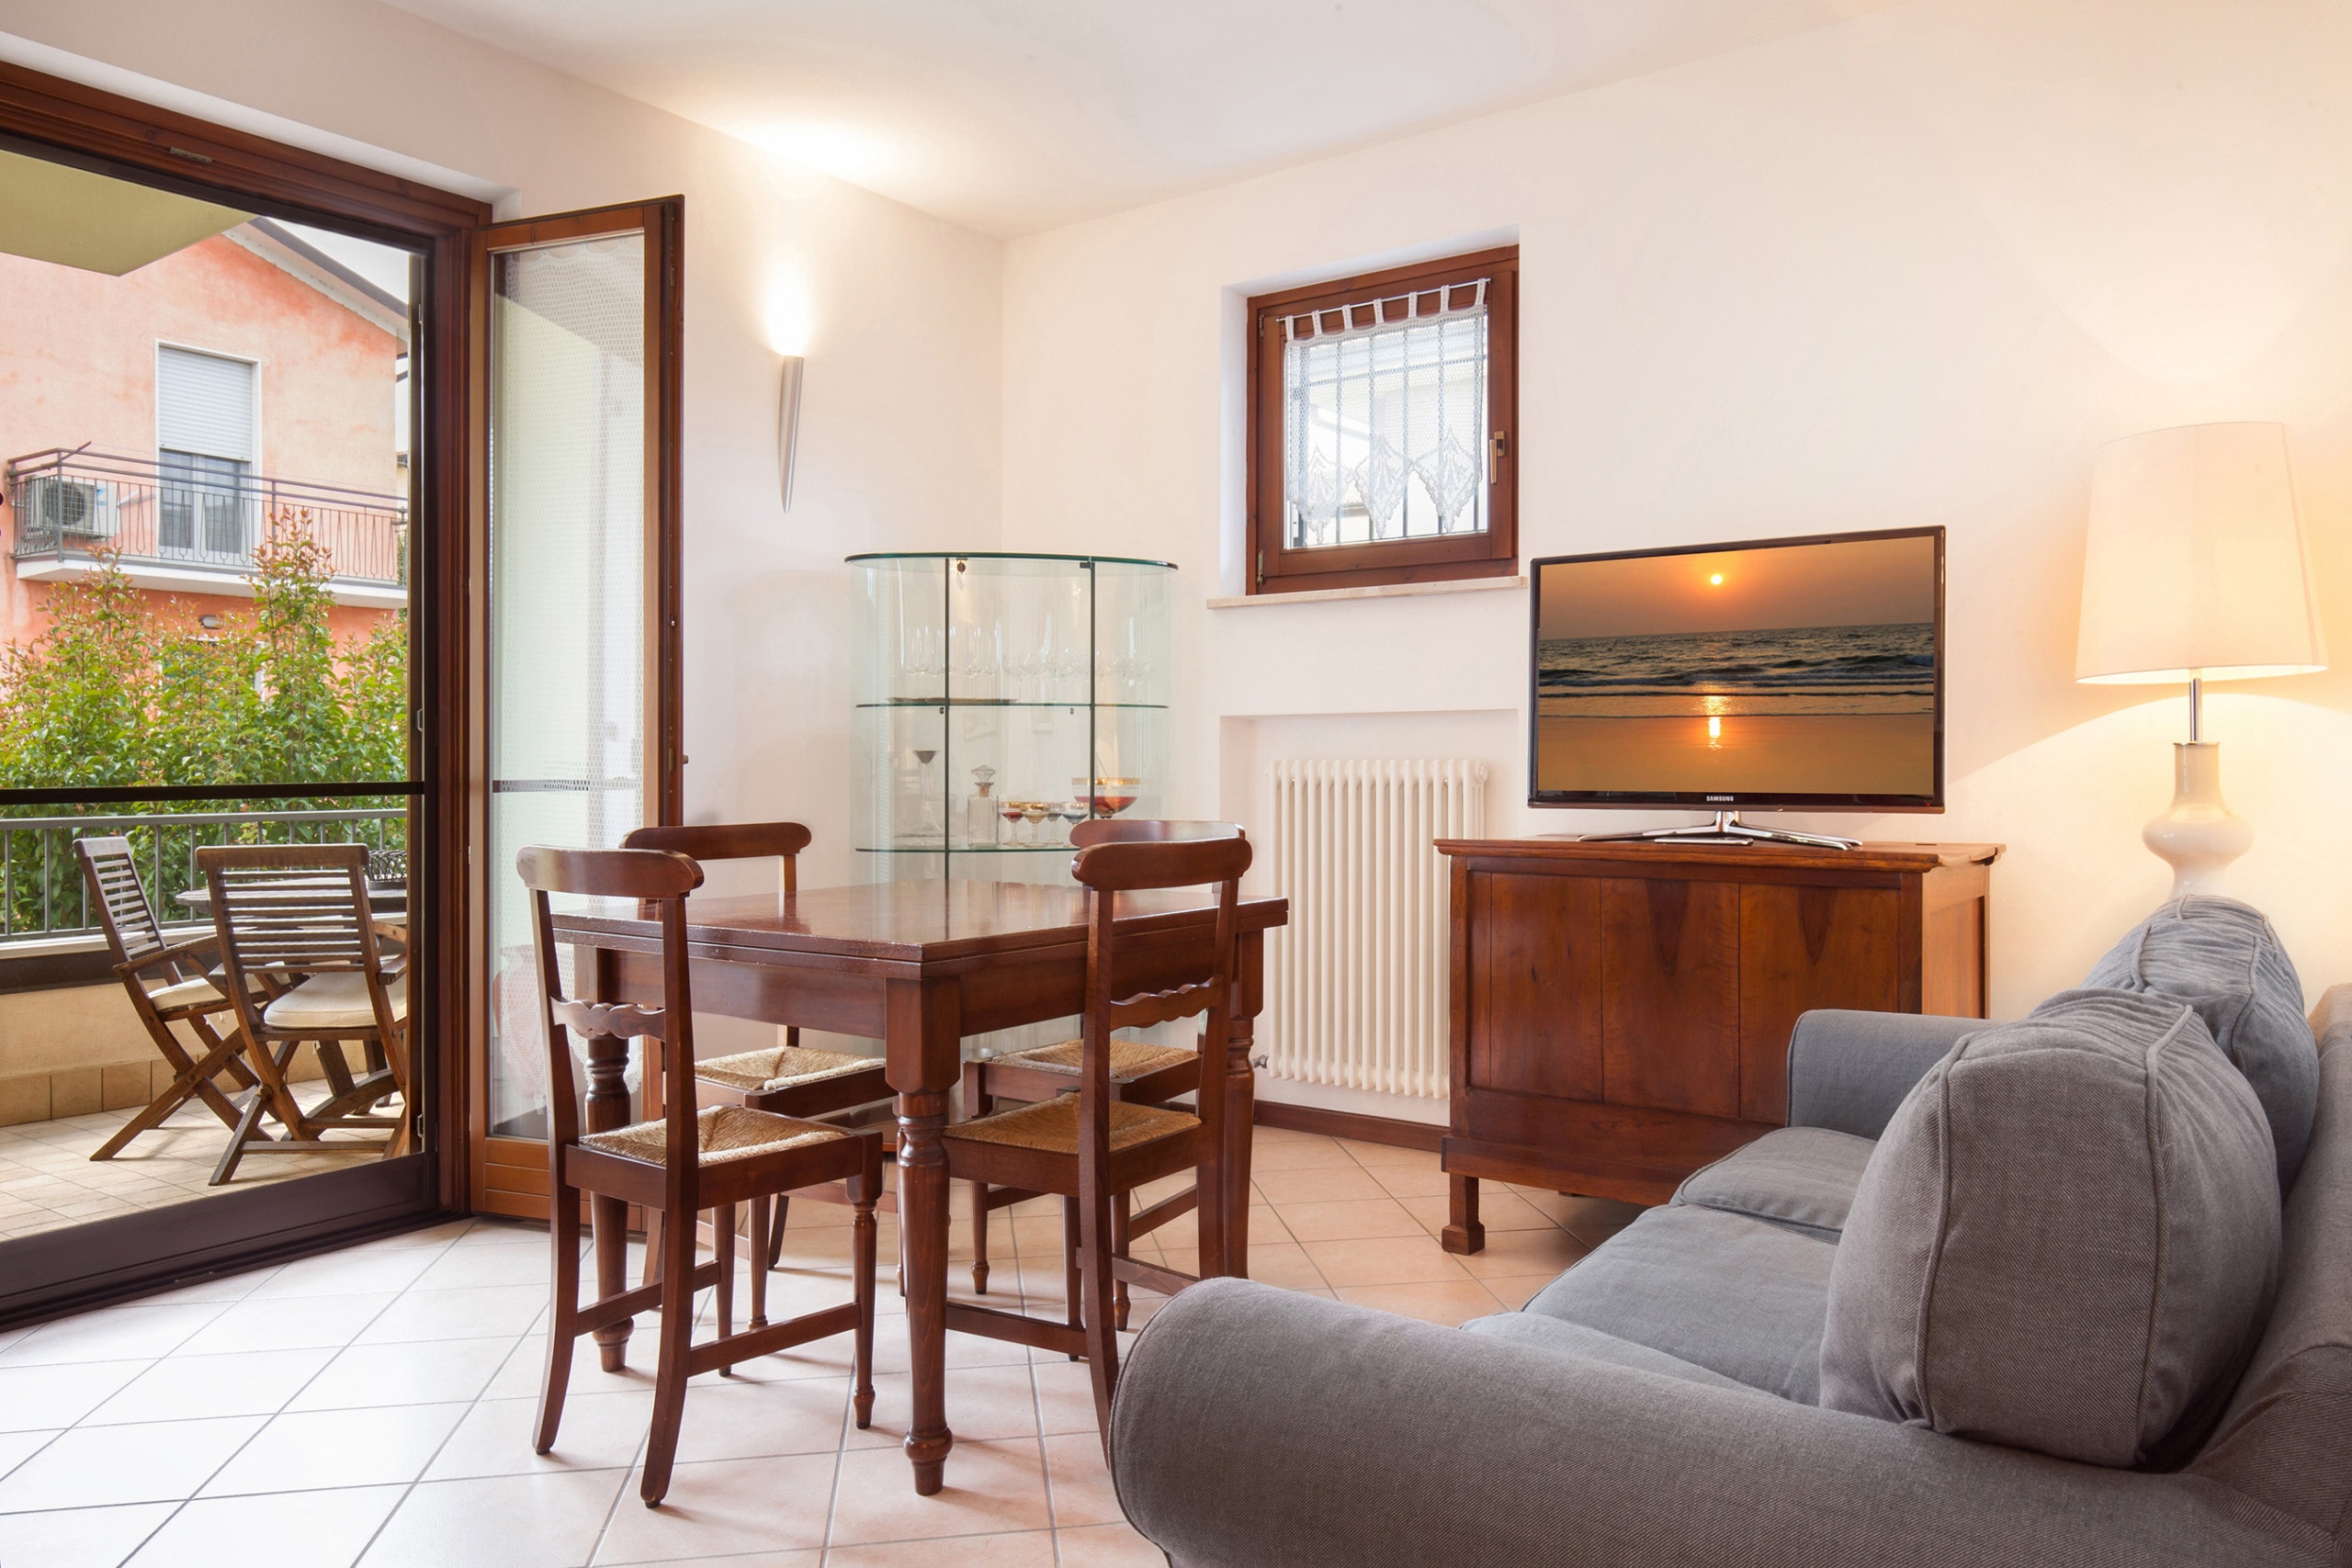 Apartment near the centre and harbour of Peschiera